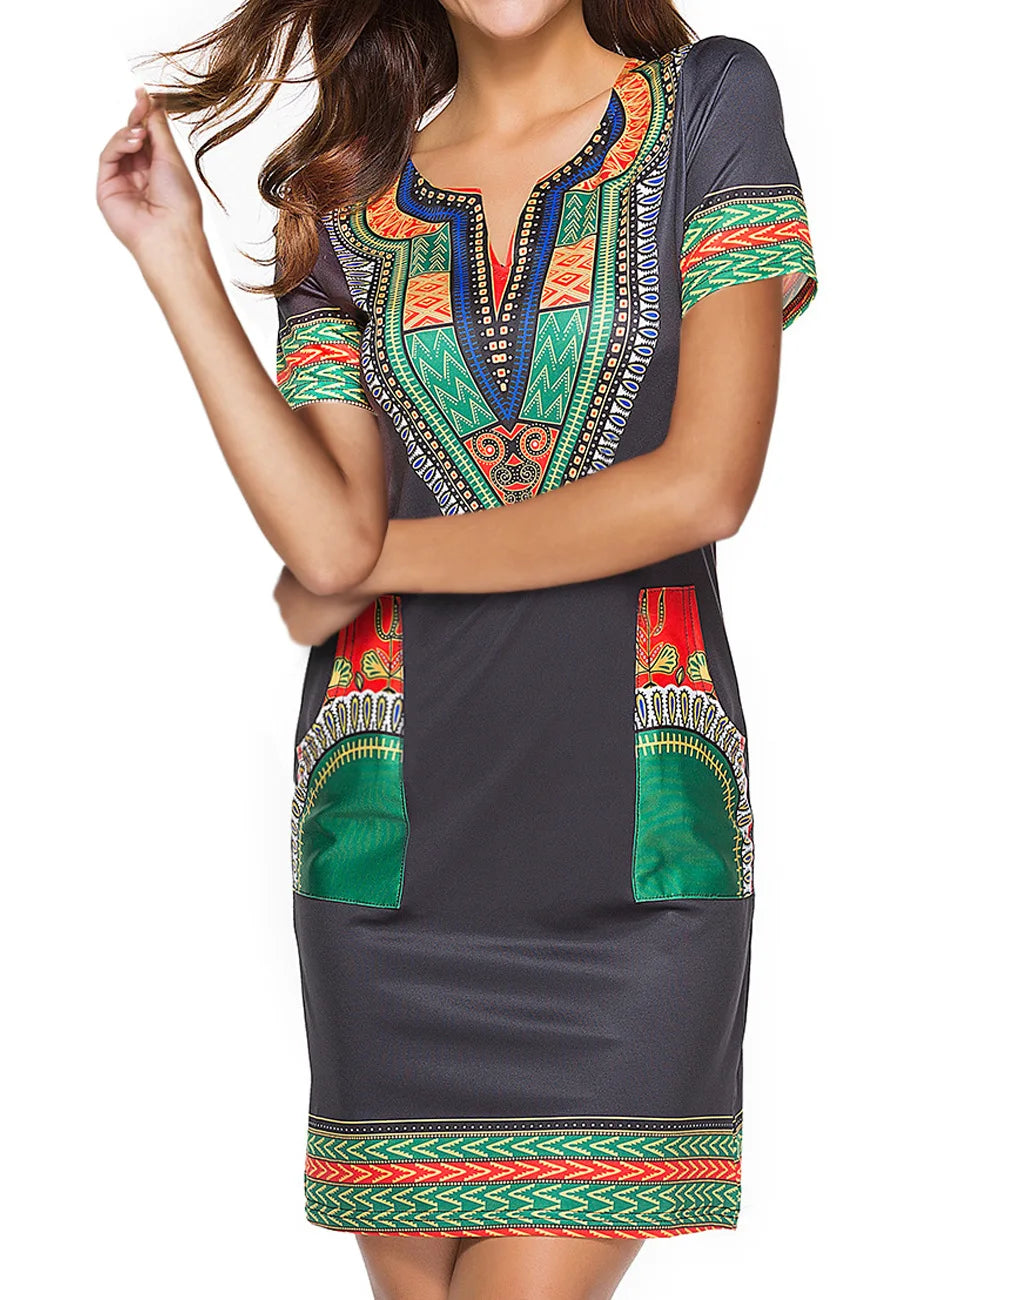 Summer Fashion: African Women's Short Sleeve V-neck Polyester Knee-length Dress - Flexi Africa - Flexi Africa offers Free Delivery Worldwide - Vibrant African traditional clothing showcasing bold prints and intricate designs